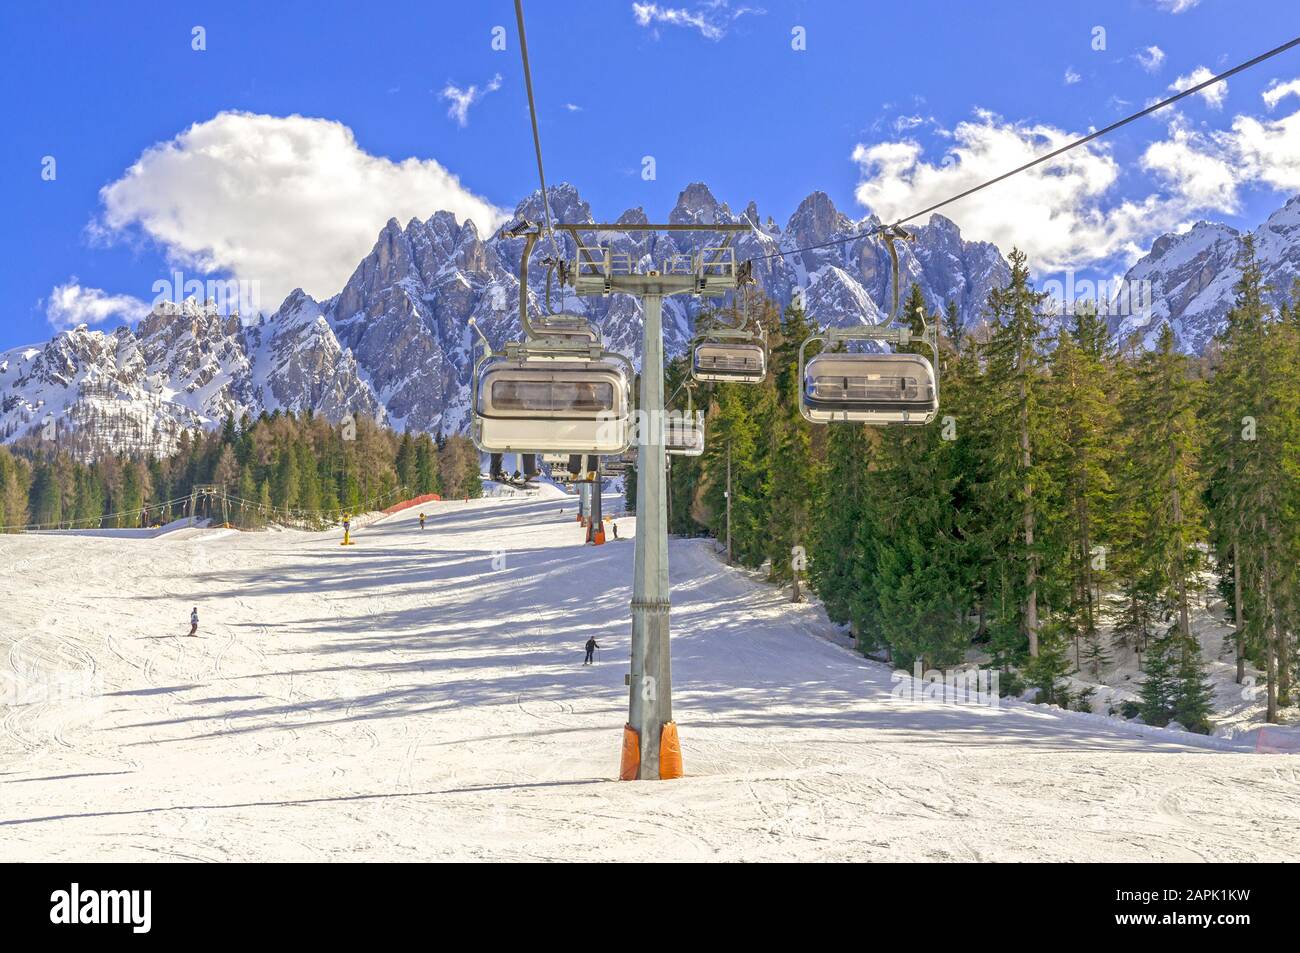 Winter landscape in Dolomites, ski slope with cable lift in San Candido with mountain range in background Stock Photo